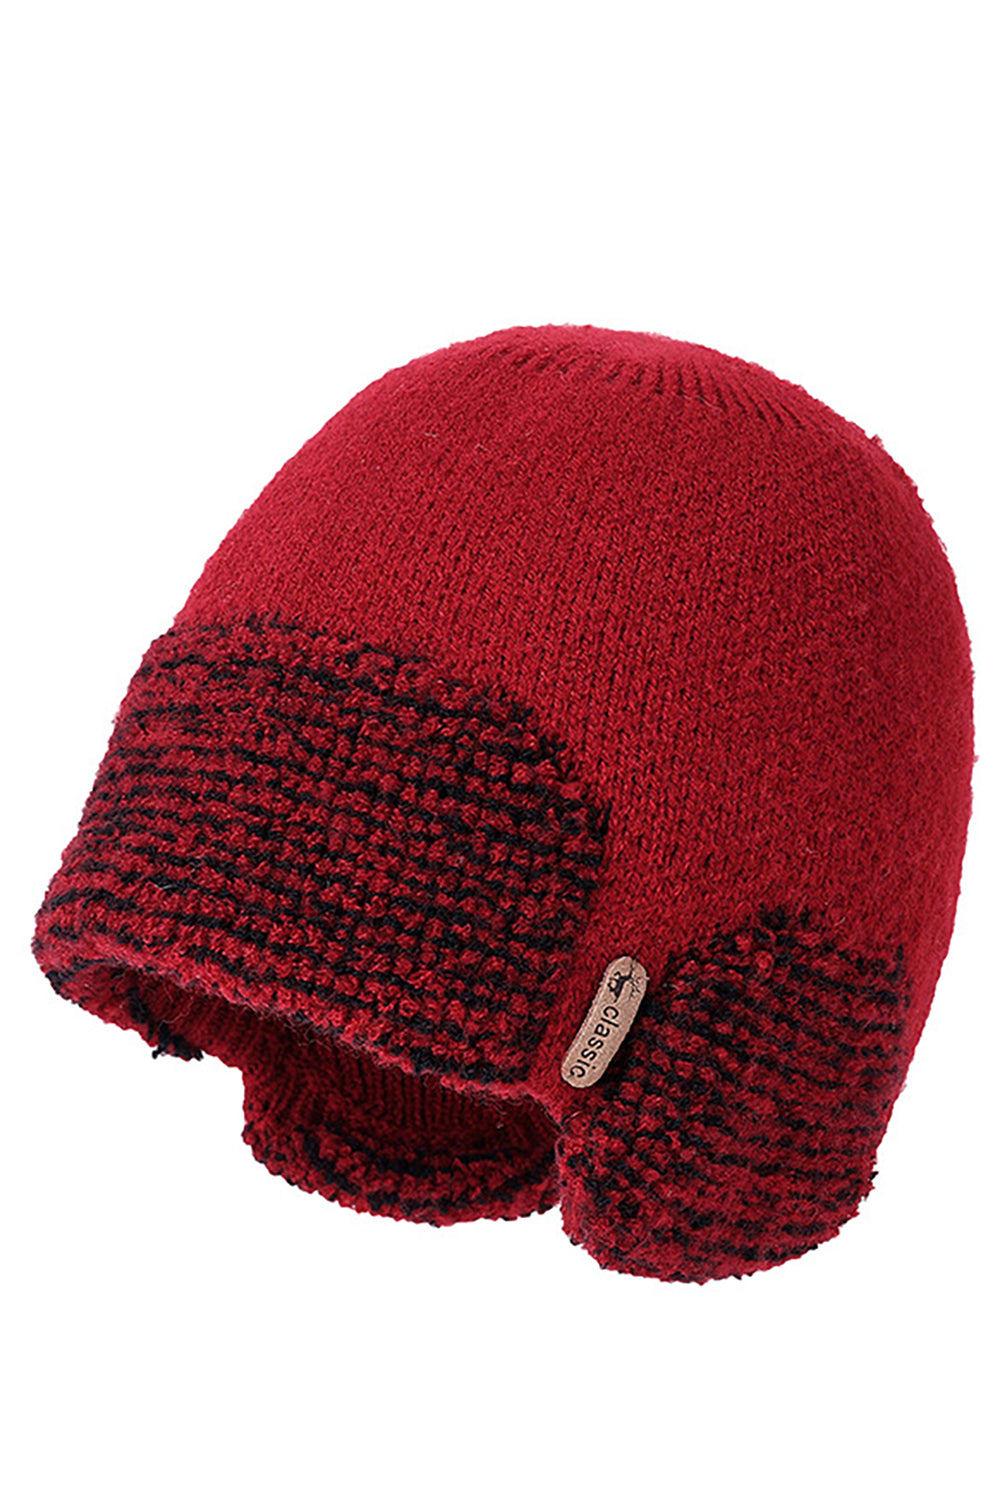 Black Knitted Warm Hat